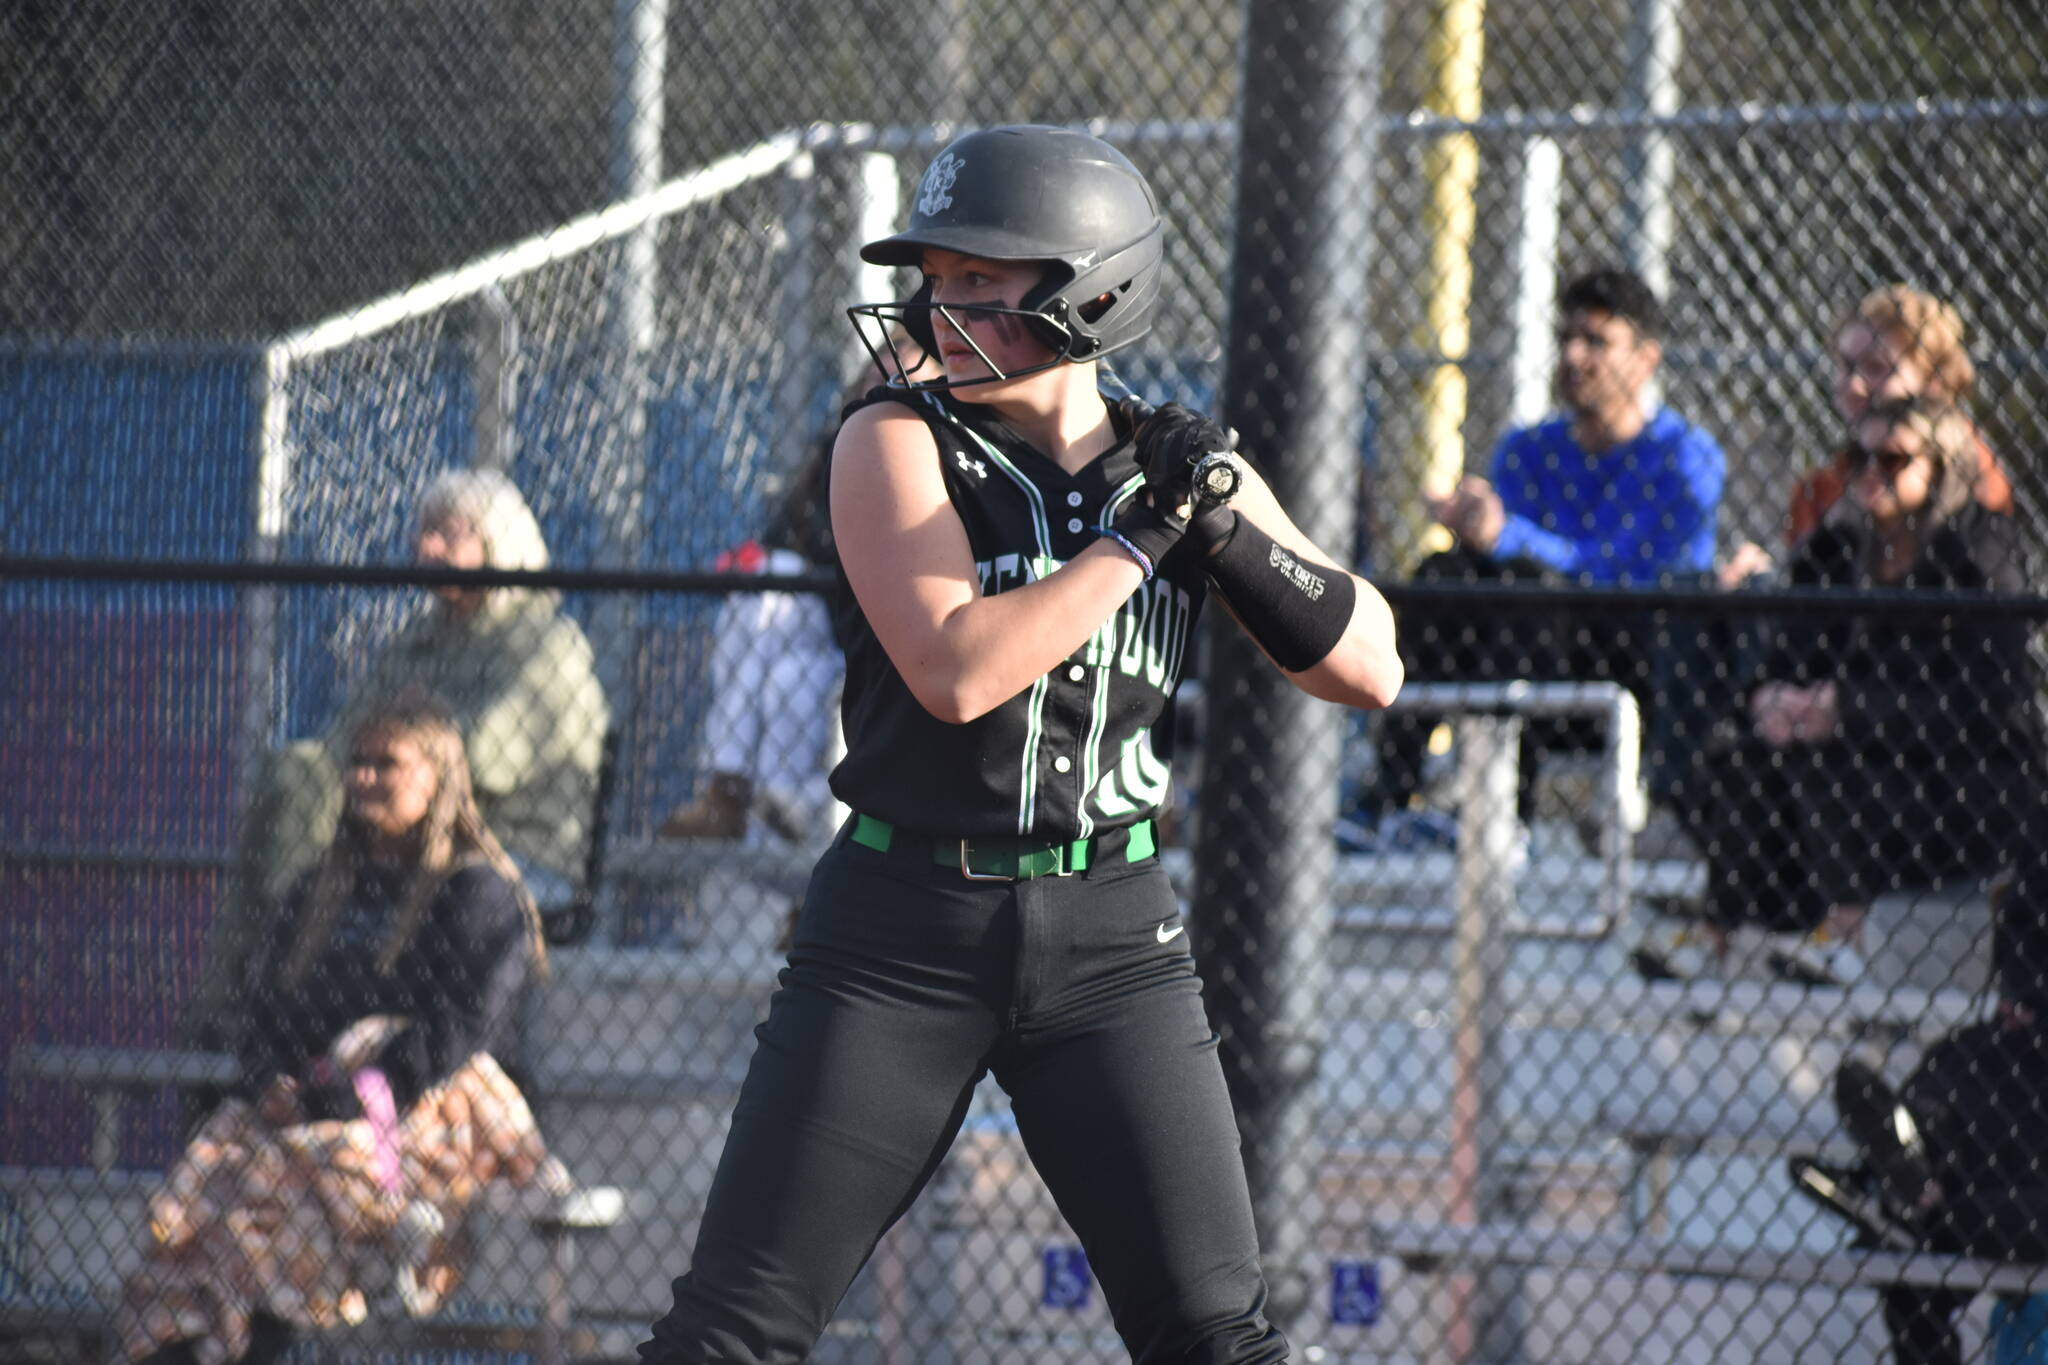 Sophia Sappa gets ready in the box for the Conks as she faces the Liberty pitcher. Ben Ray / The Reporter